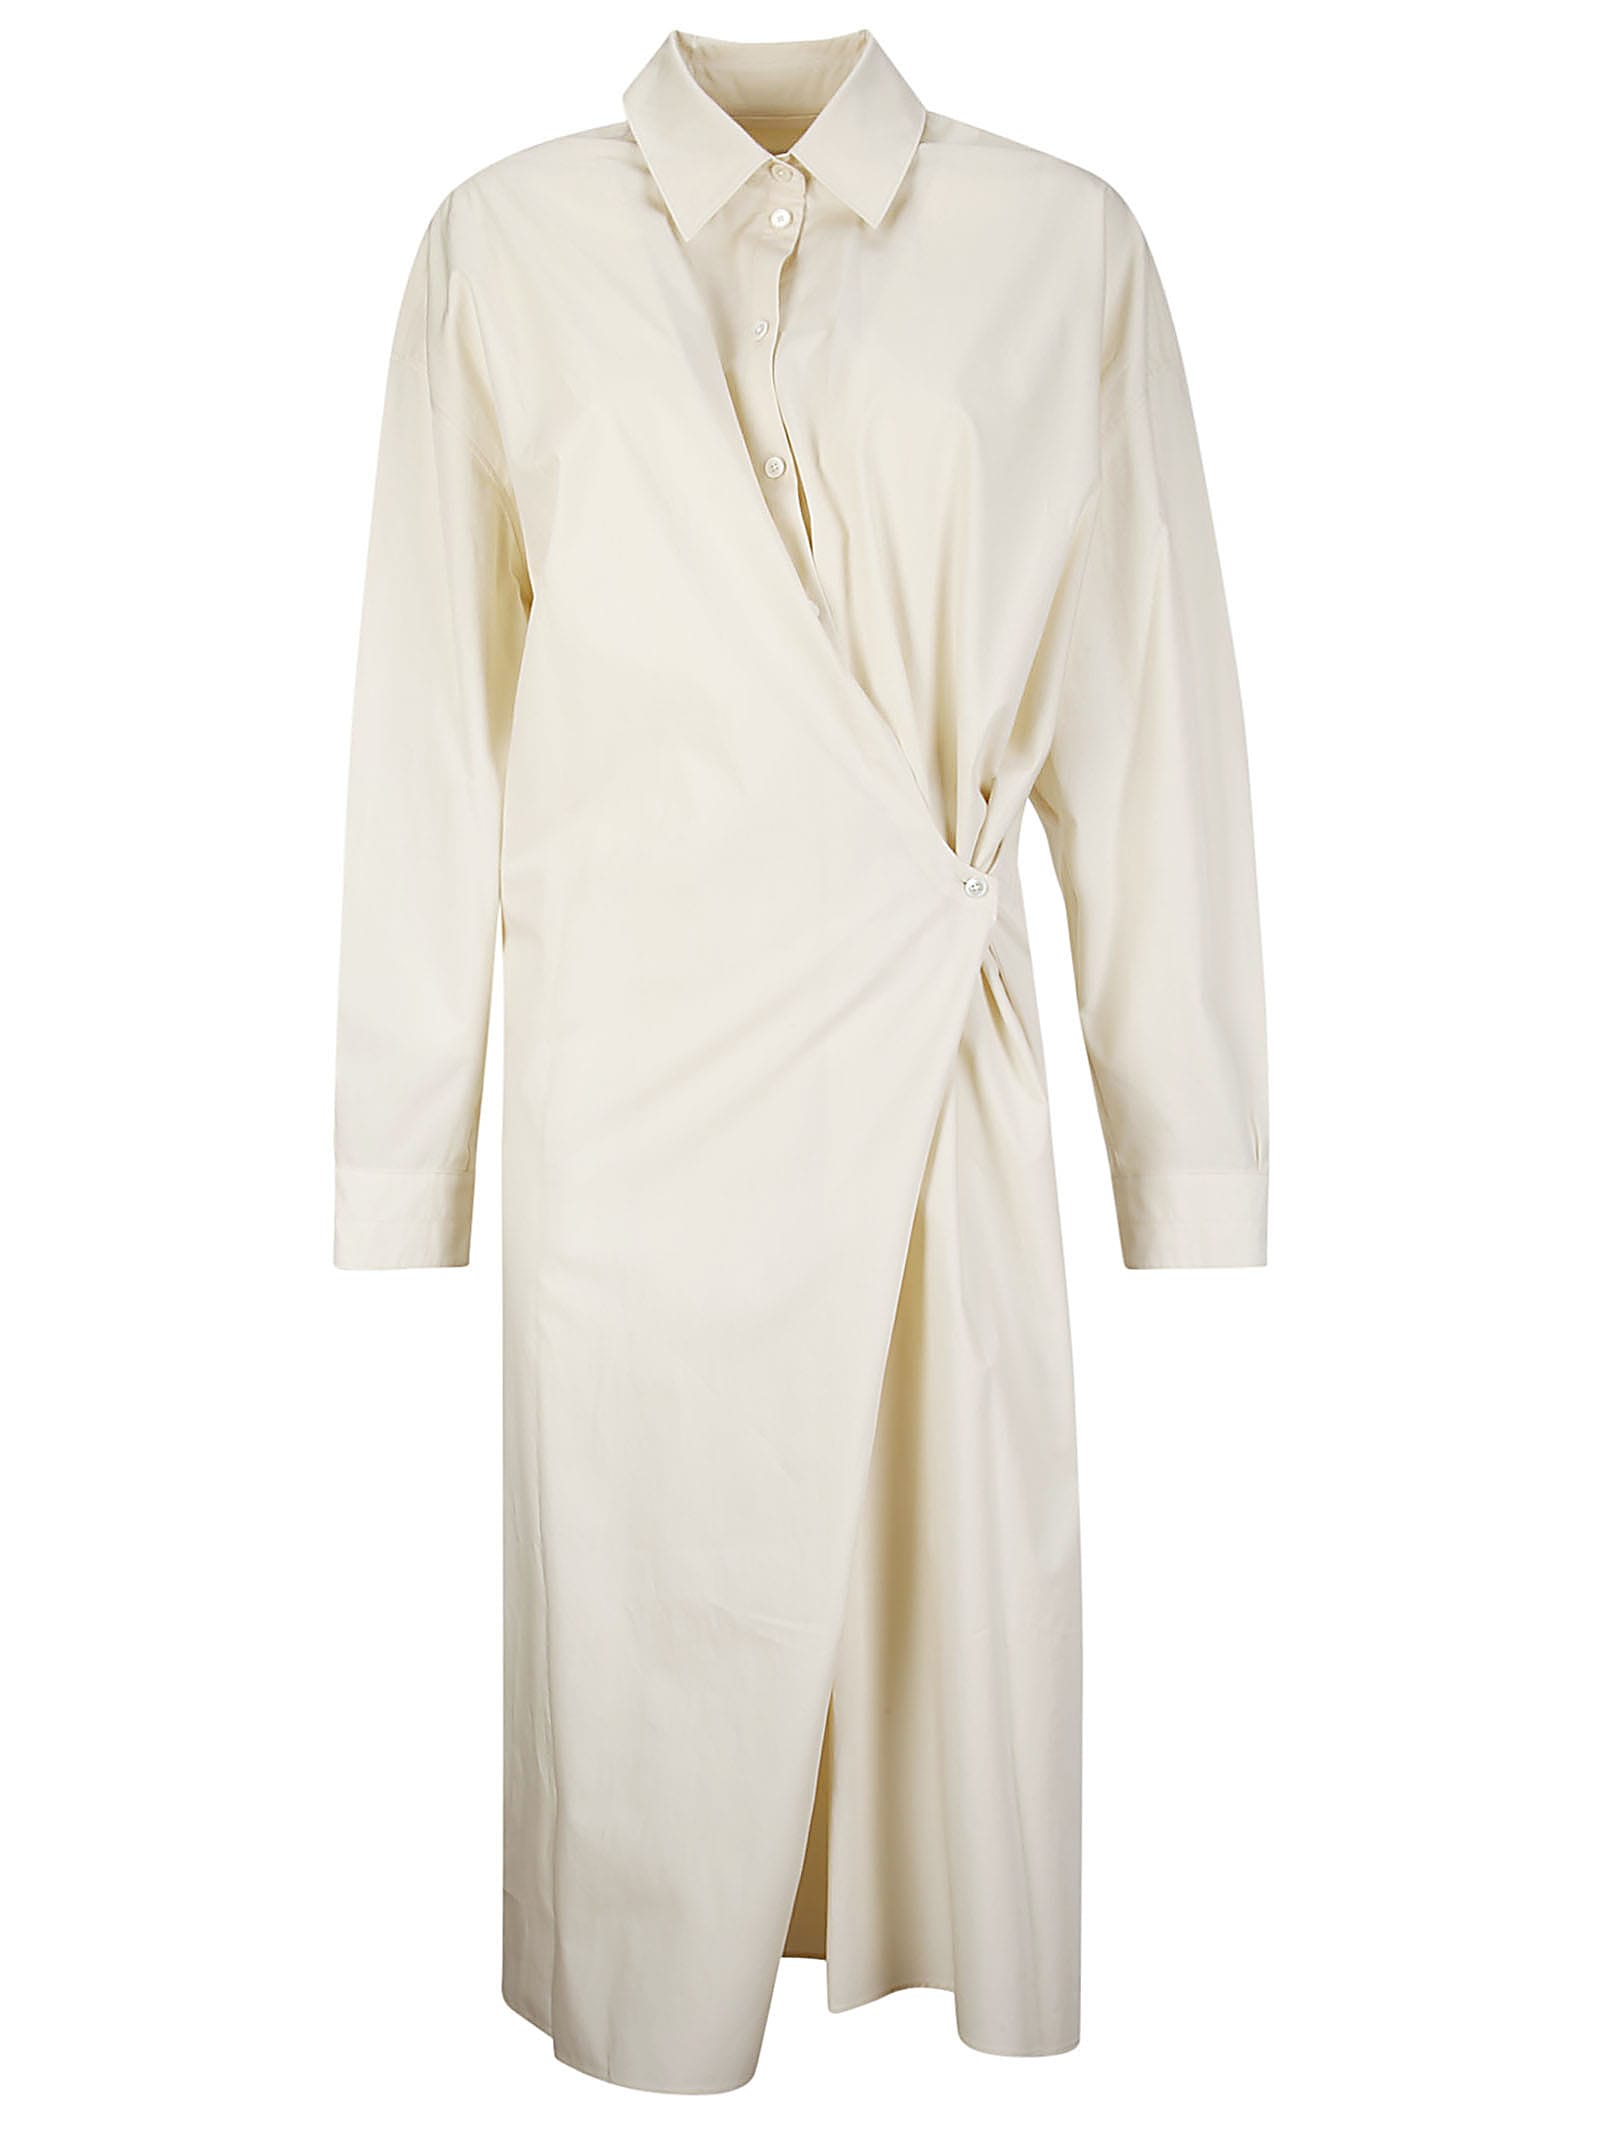 LEMAIRE STRAIGHT COLLAR TWISTED DRESS